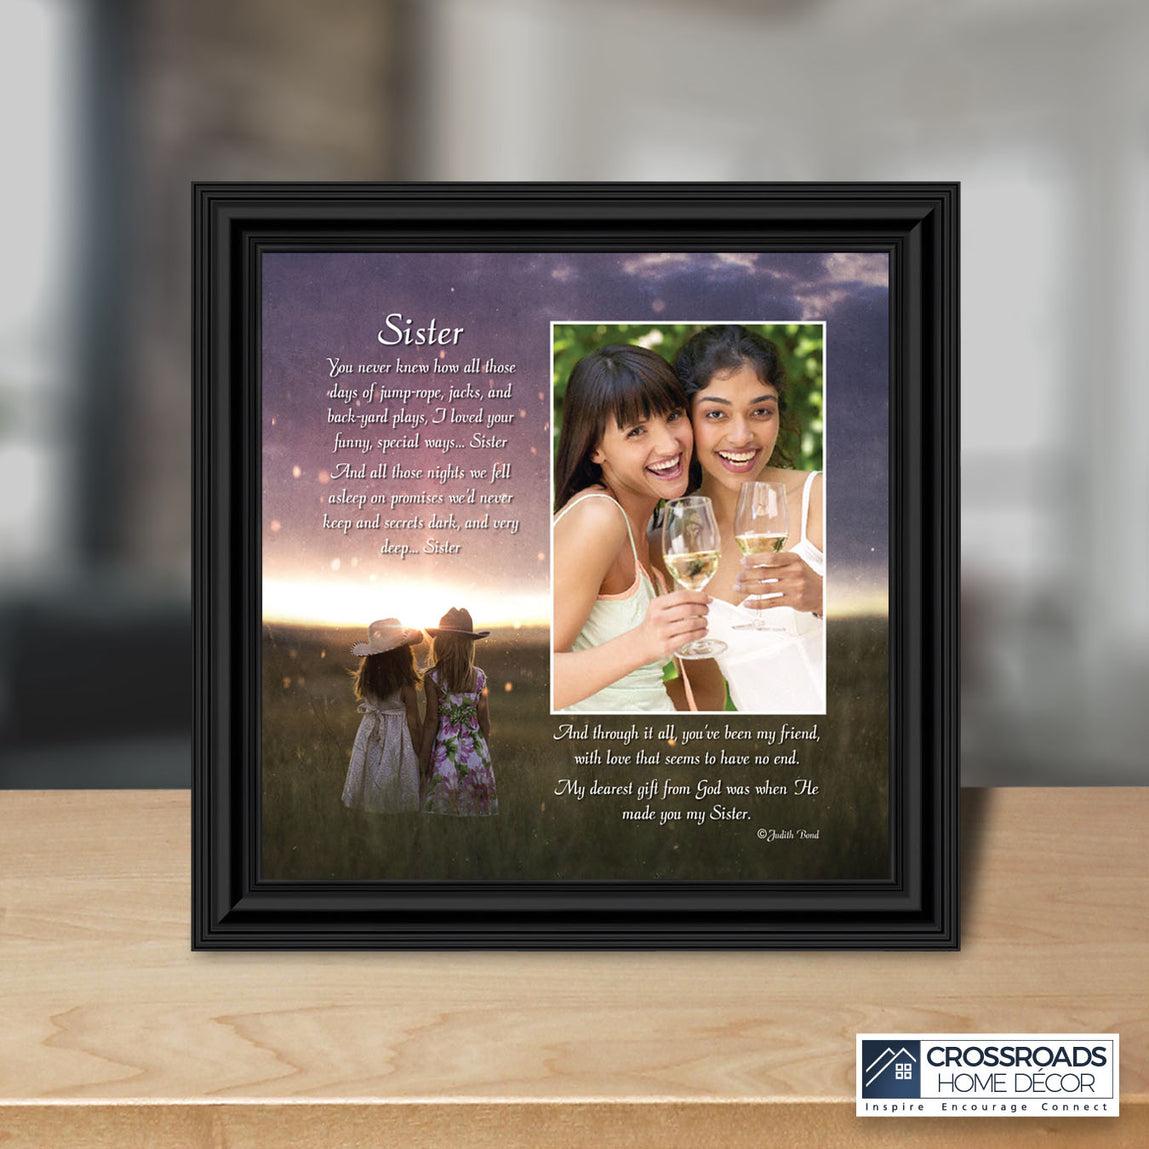 Buy KATE POSH - Sisters Picture Frame - Engraved Natural Wood Photo Frame -  Big Sister, Little Sister, Maid of Honor, Matron of Honor Gifts, Birthday  Gifts (5x7-Vertical) Online at Low Prices